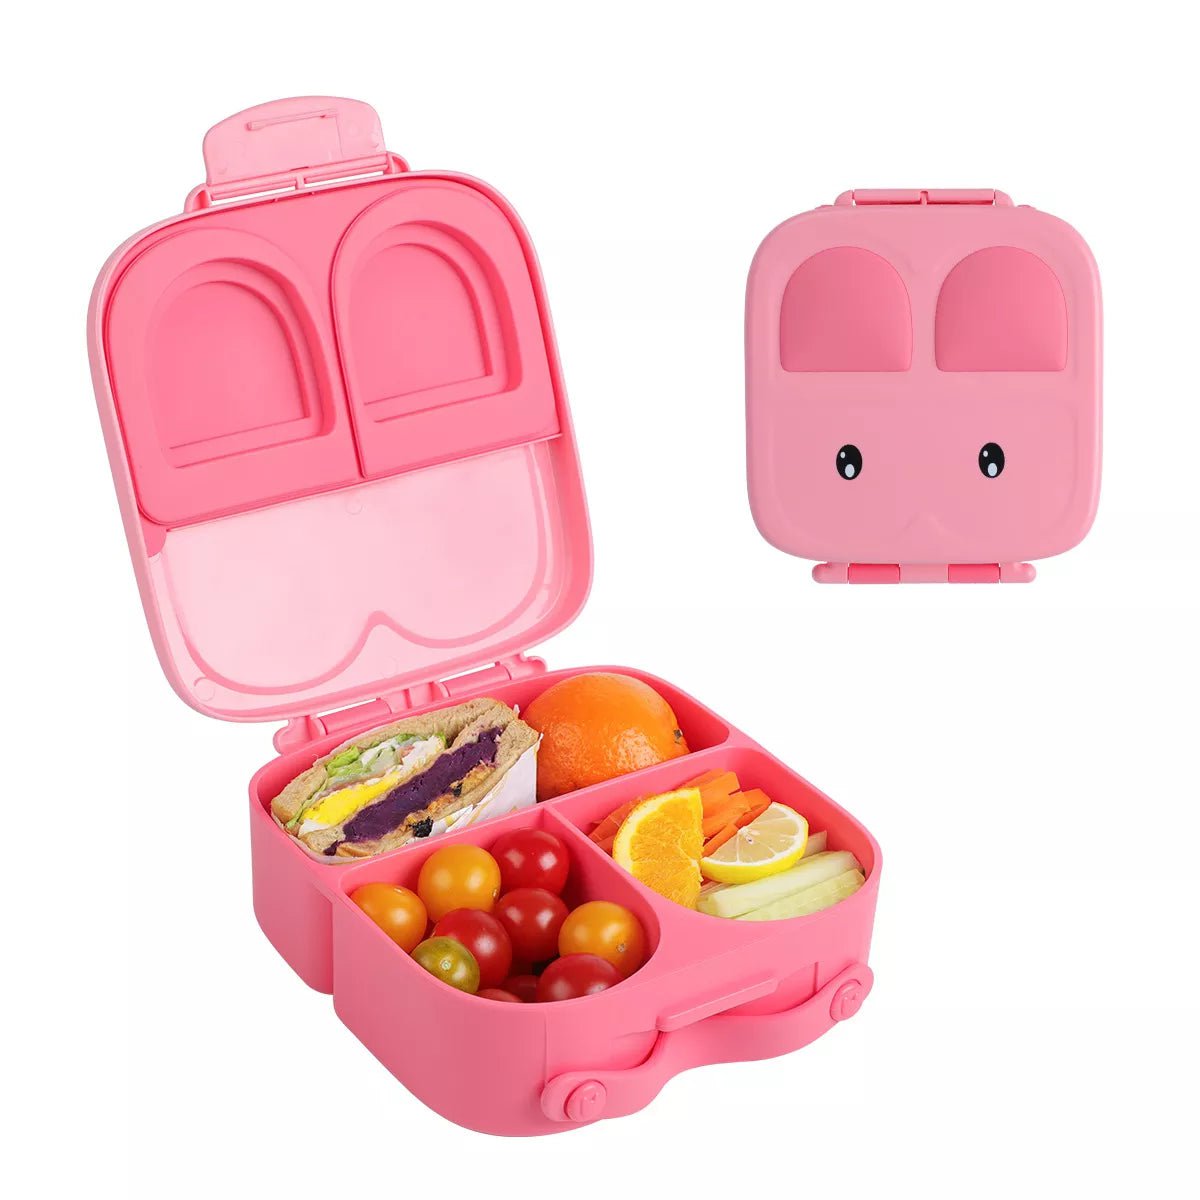 Portable Microwave Lunch Box with 4 Compartments - Ideal for Adults, Kids, and Toddlers. Sealed Salad Box for Picnics and Food Storage pink